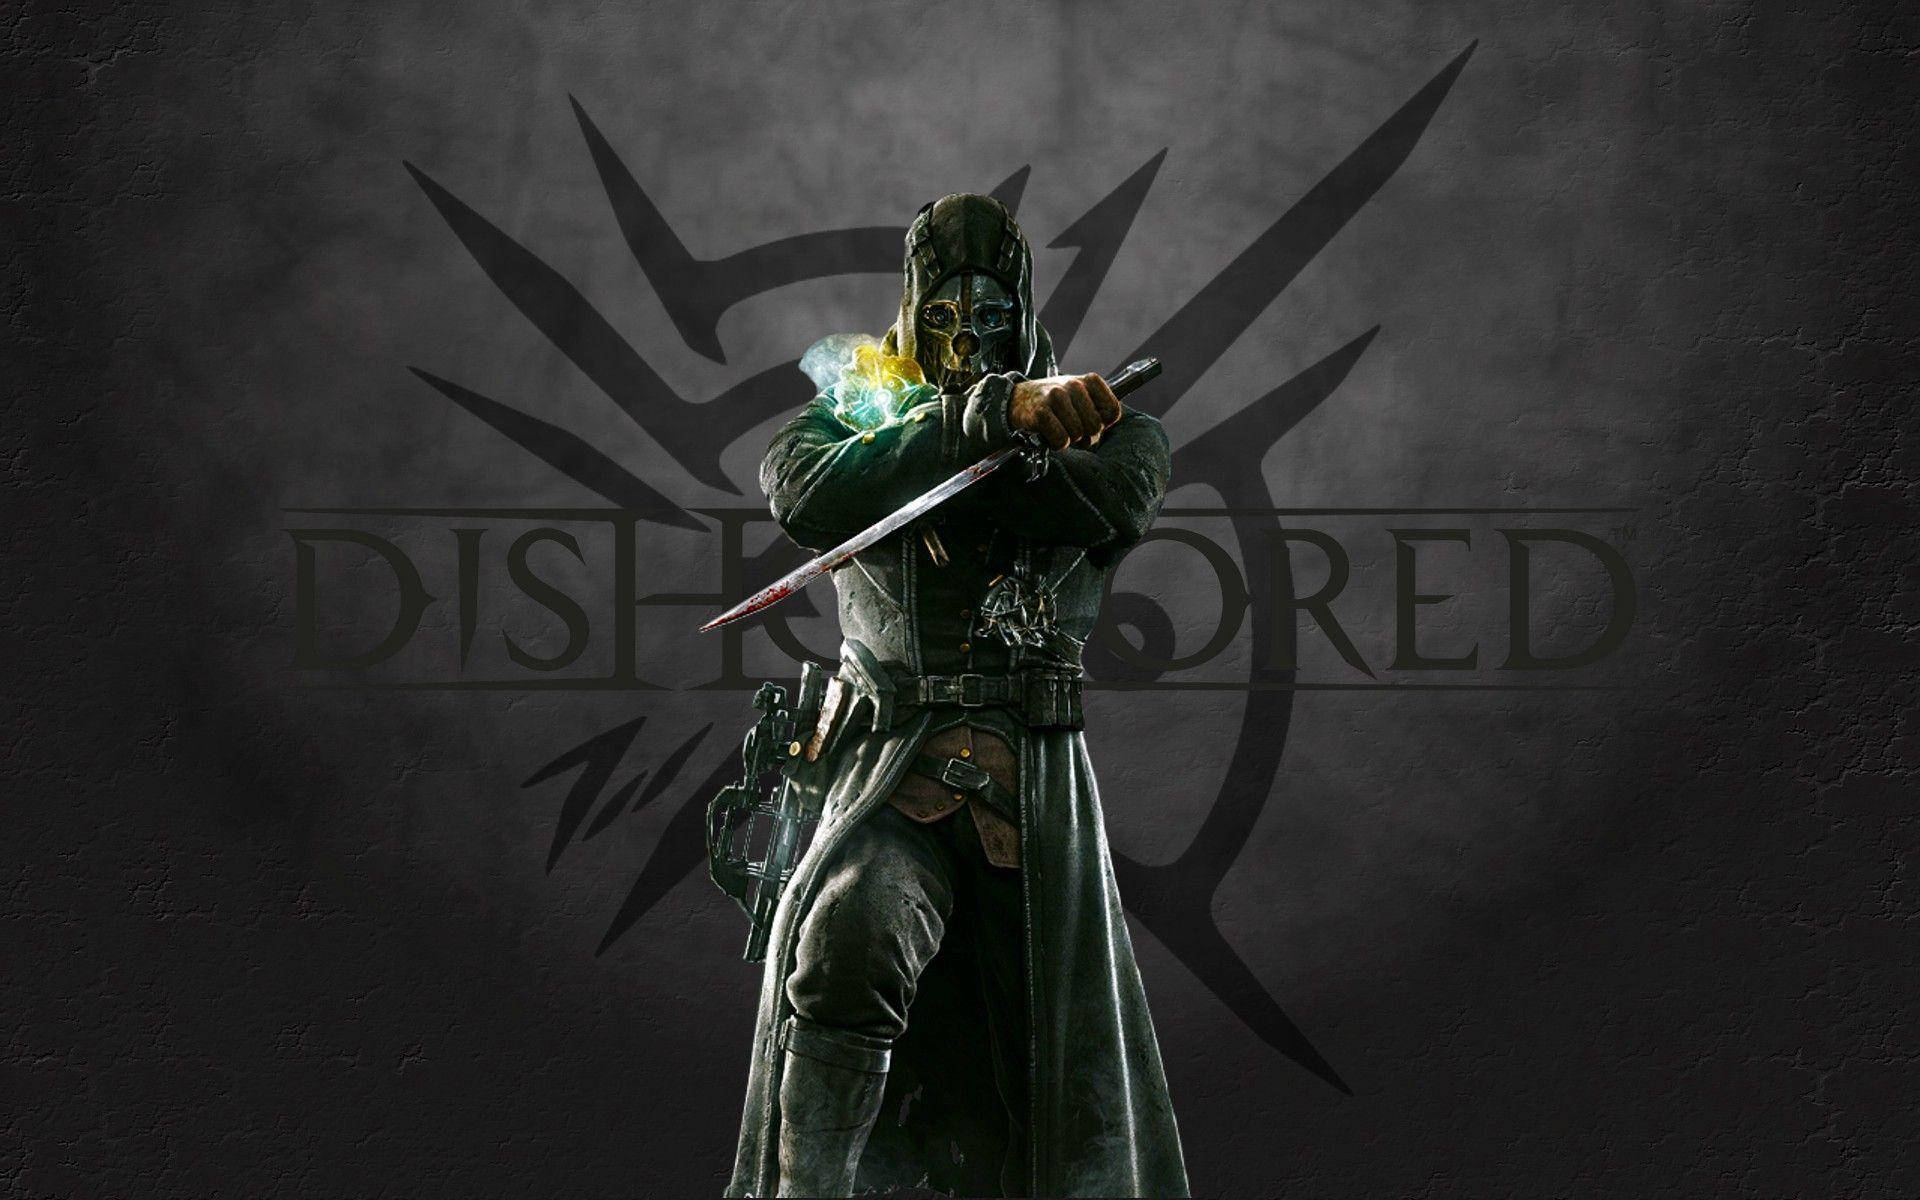 Cool Dishonored Design Background